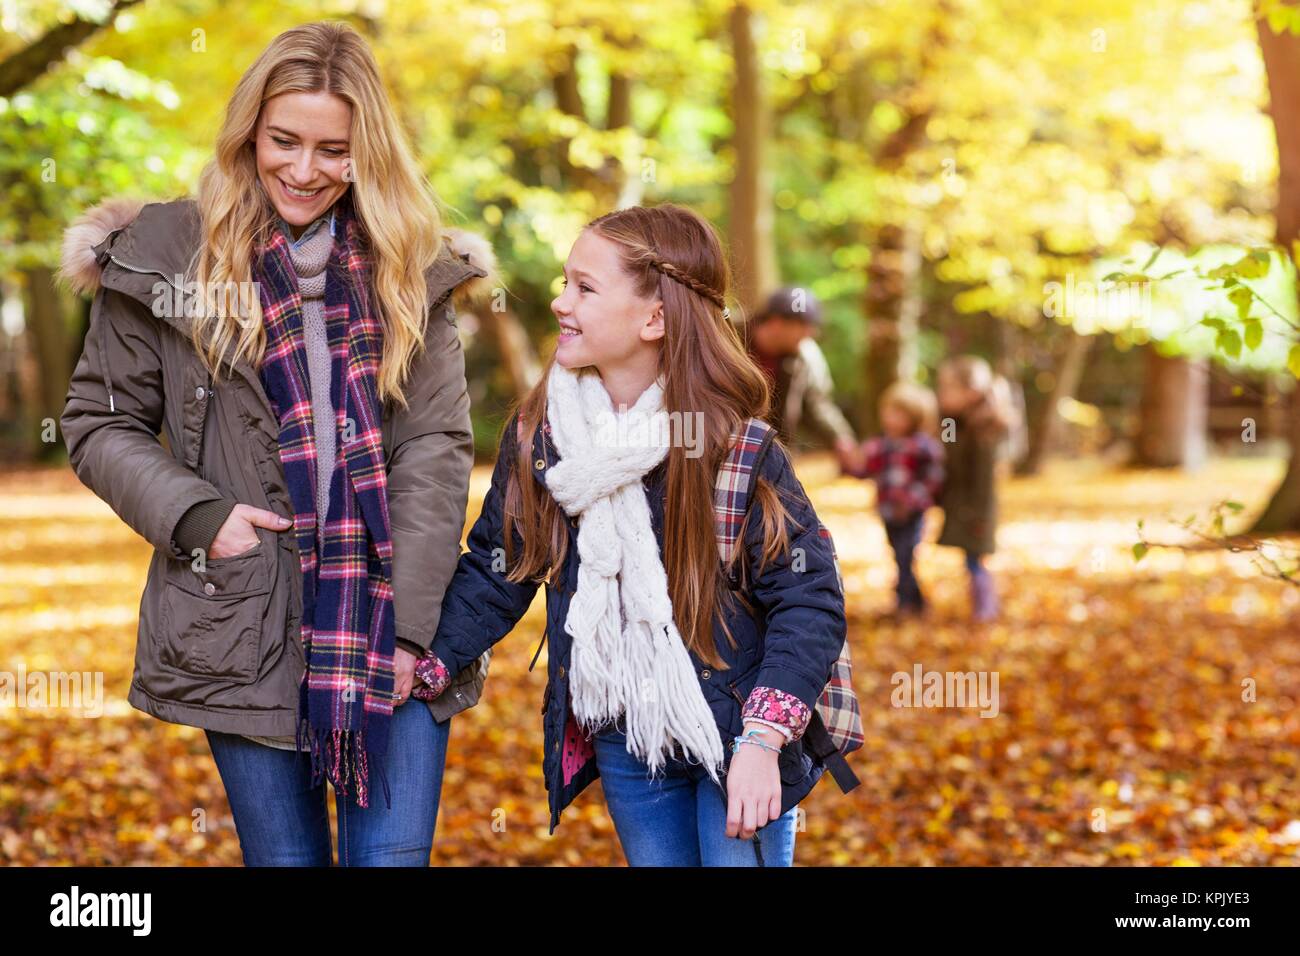 Mother walking through woods with her daughter. Stock Photo